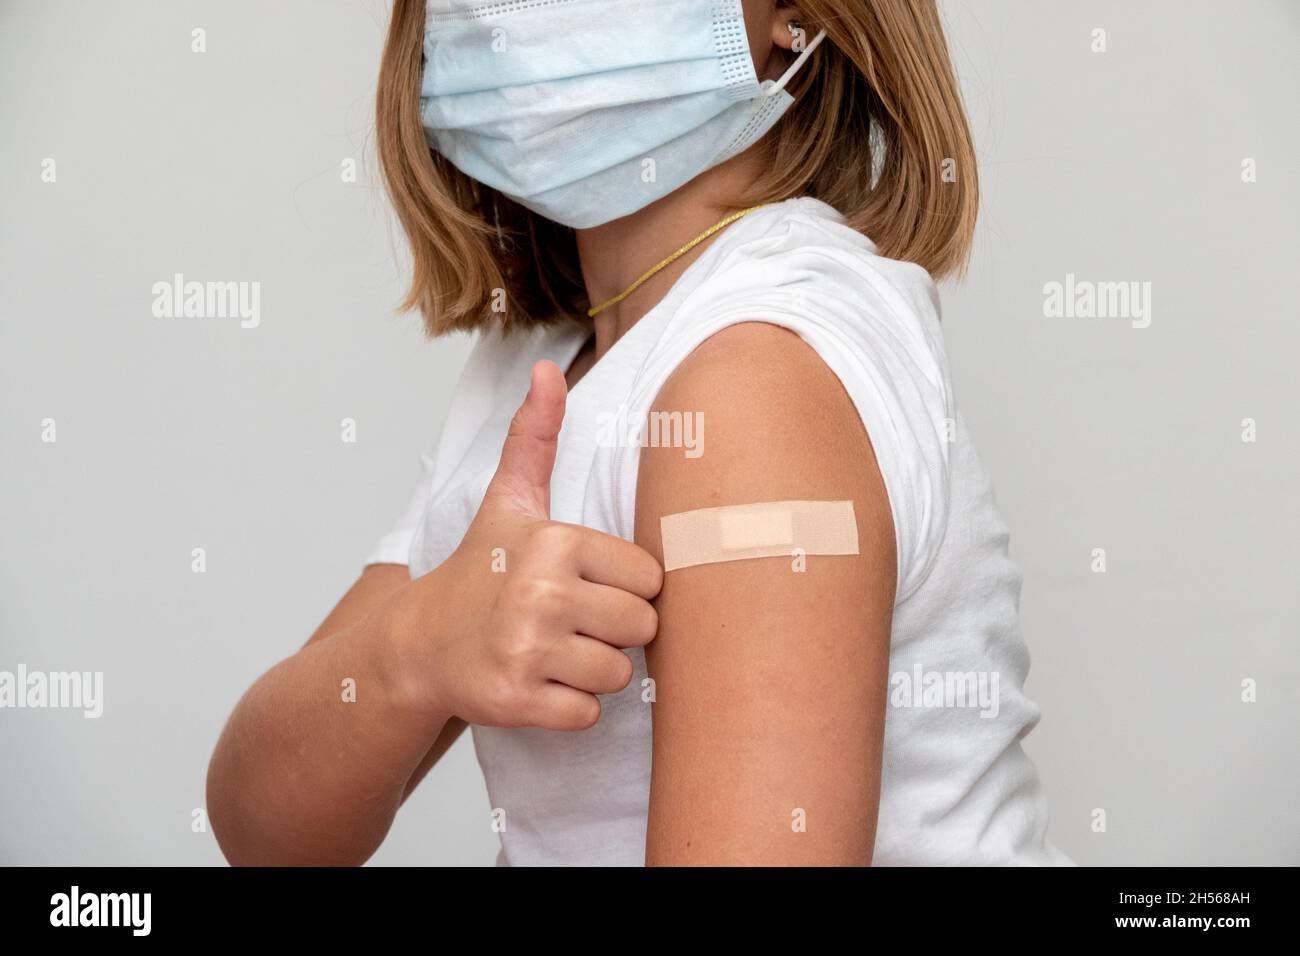 Children receiving vaccine at out side of the thigh.Children vaccine. Stock Photo